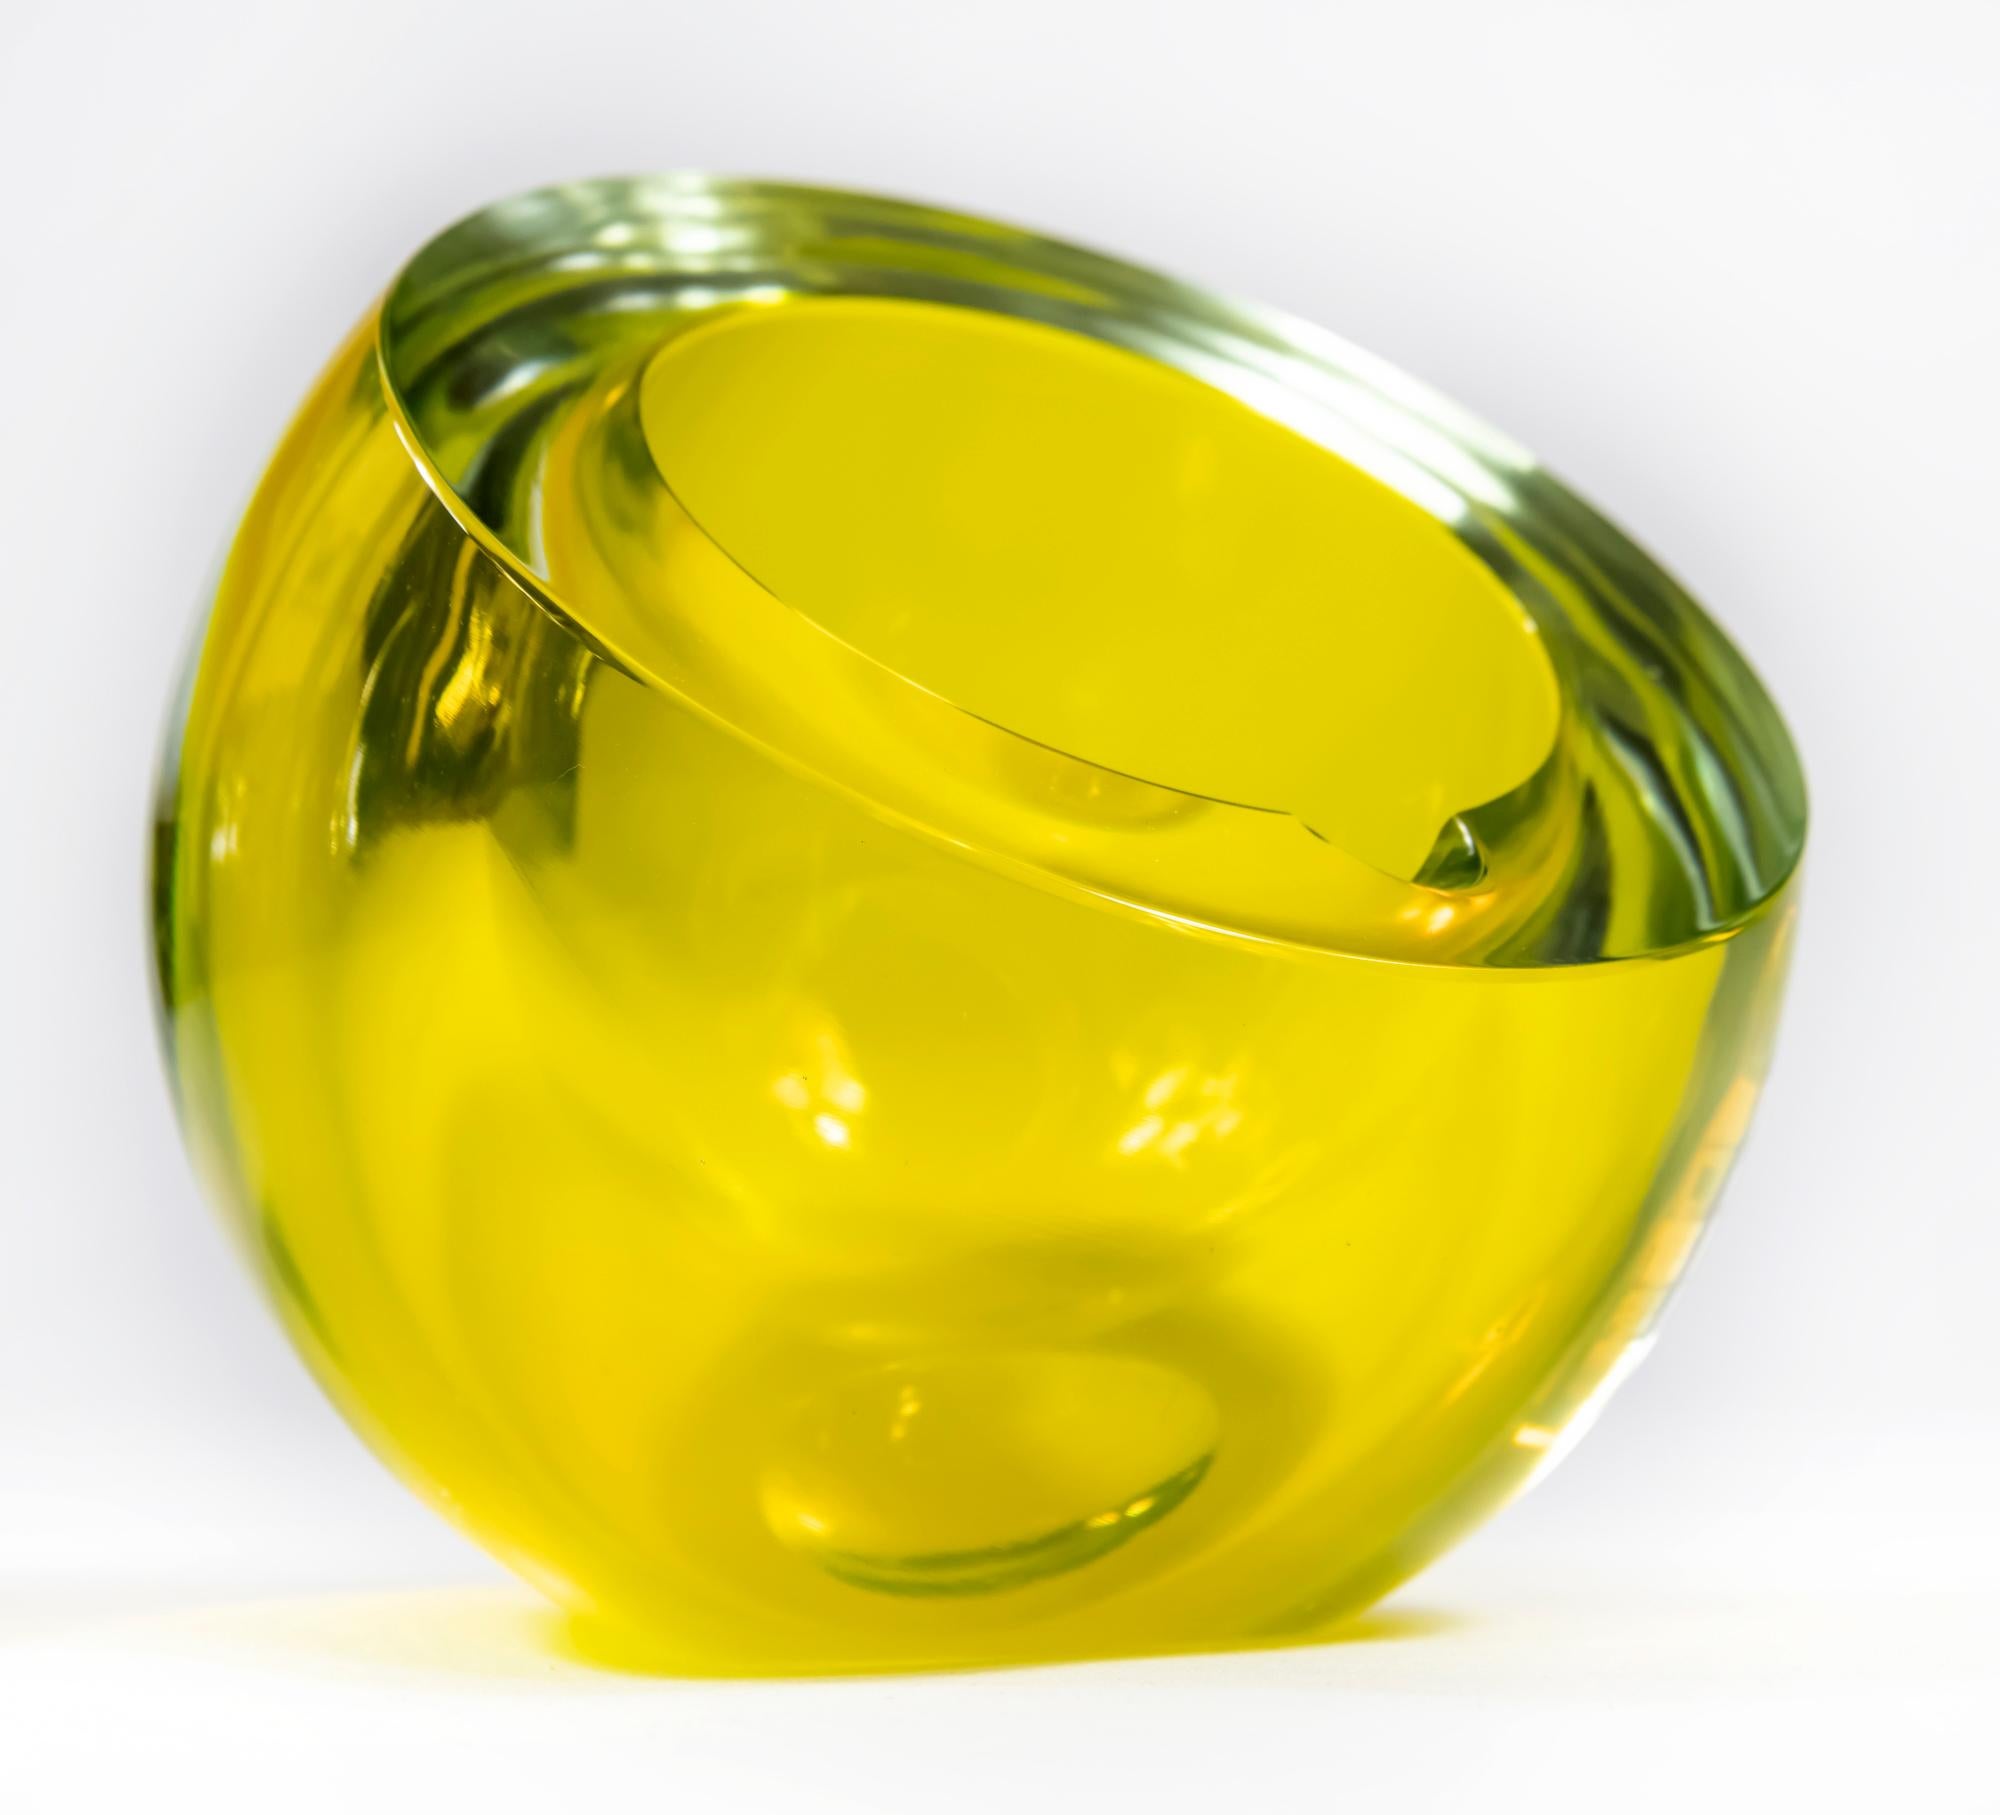 This vintage Italian handmade bowl / ash tray is handmade of yellow Murano glass. The form is asymmetric round with thick edge. It is very heavy.